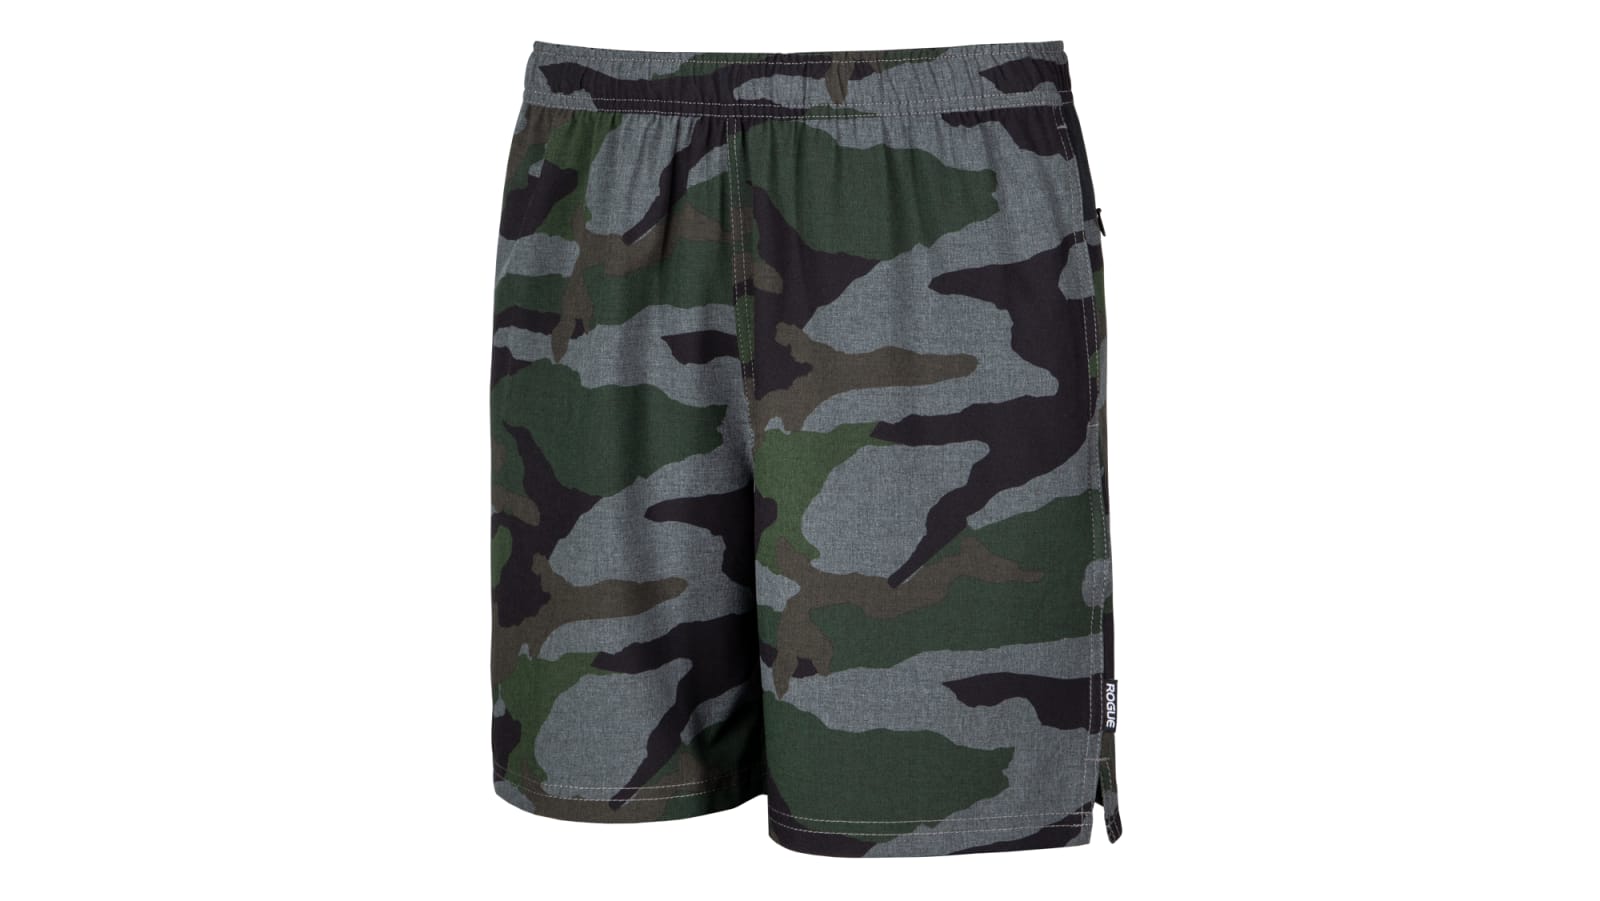 dennenboom Mus privaat Rogue Black Ops Shorts 6" 2.0 - Camo | Rogue Fitness